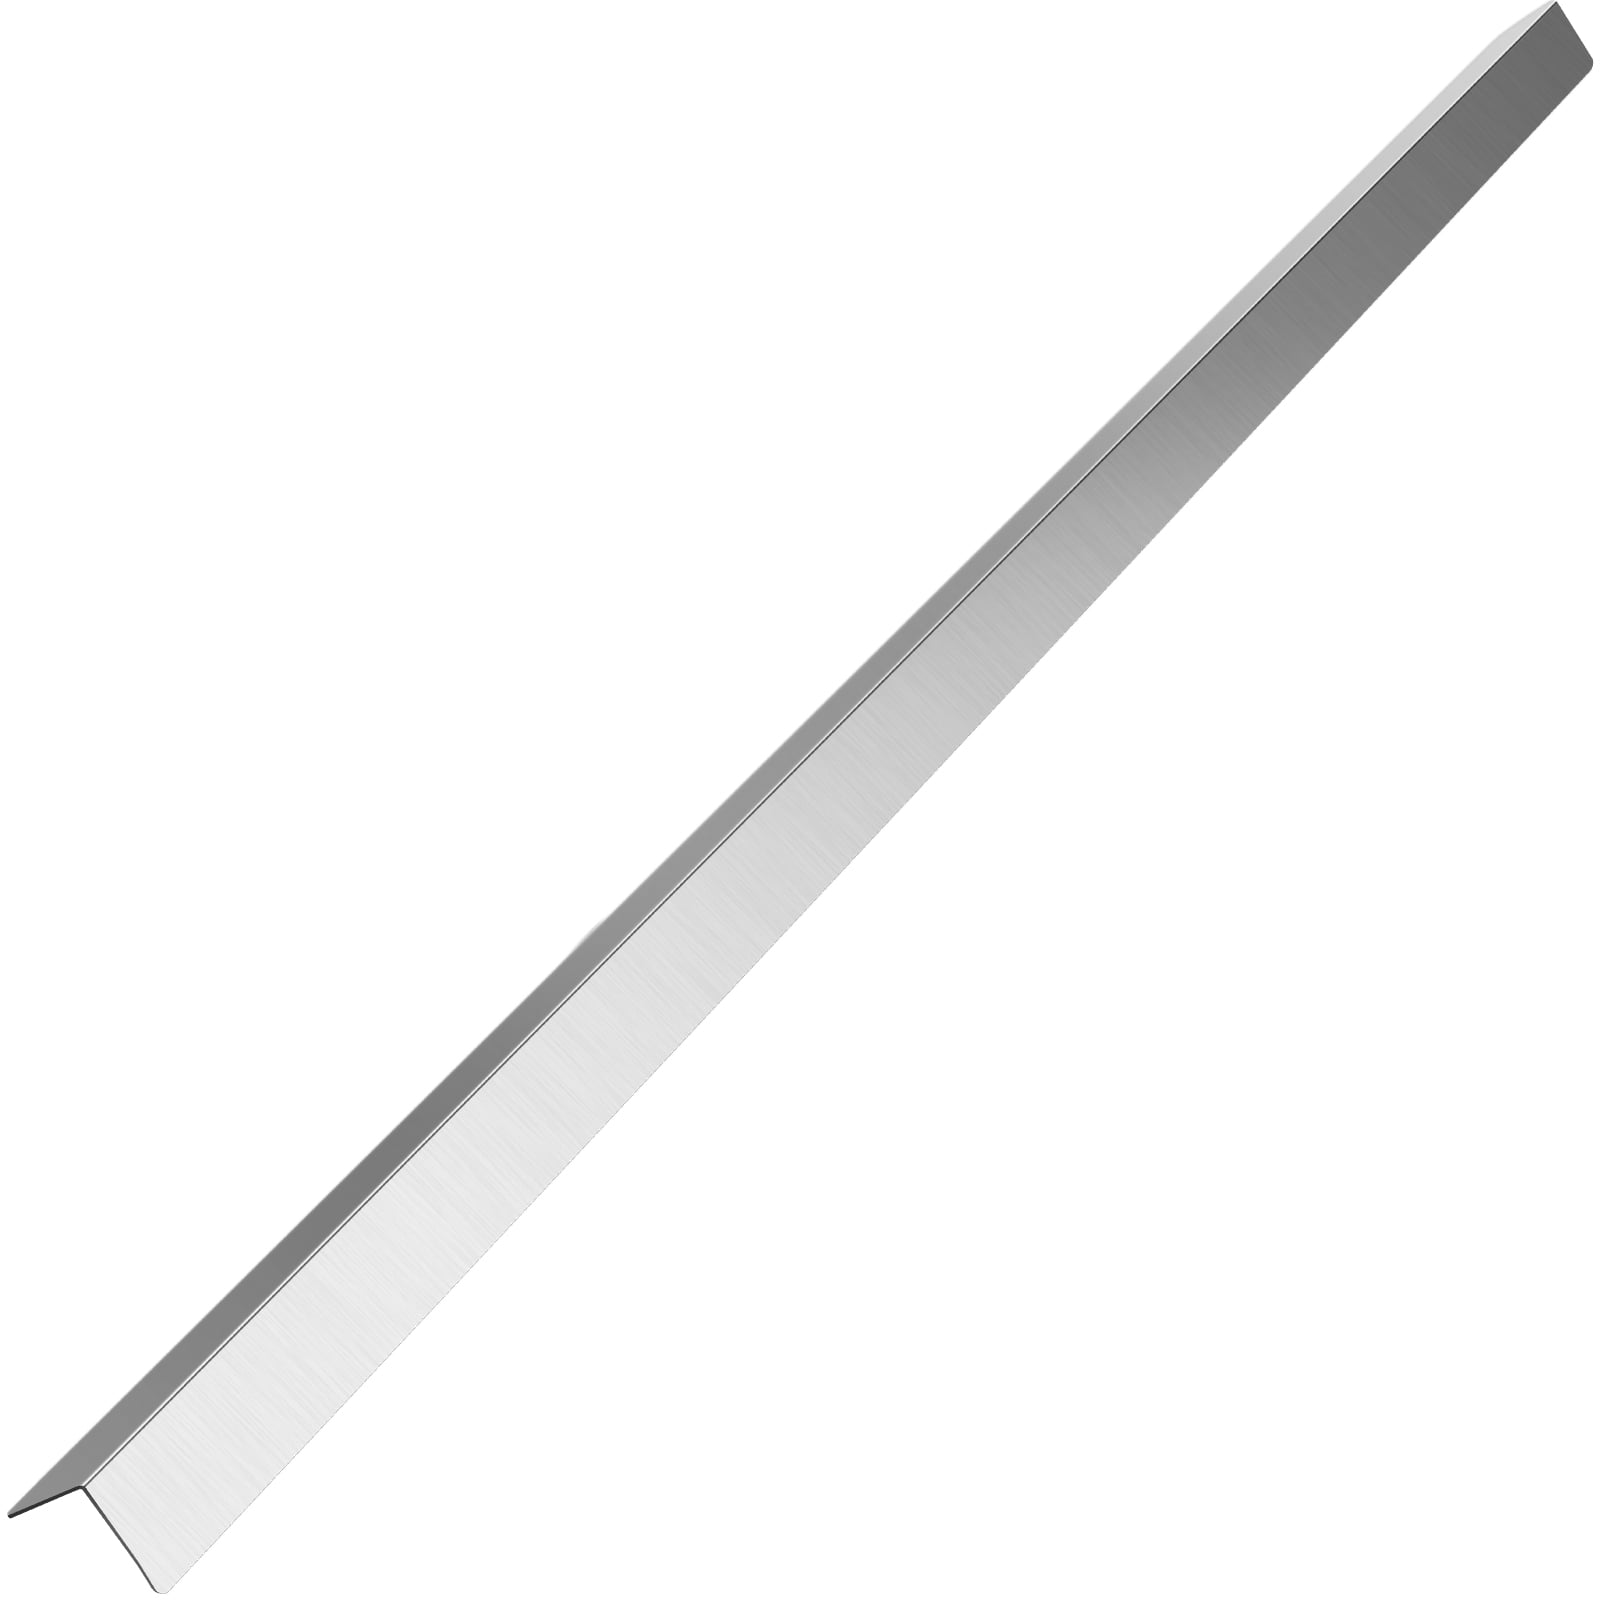 18 Gauge 8 FT 96" X 3.5" X 3.5" Stainless Steel Angle Corner Guard Wall Trim 